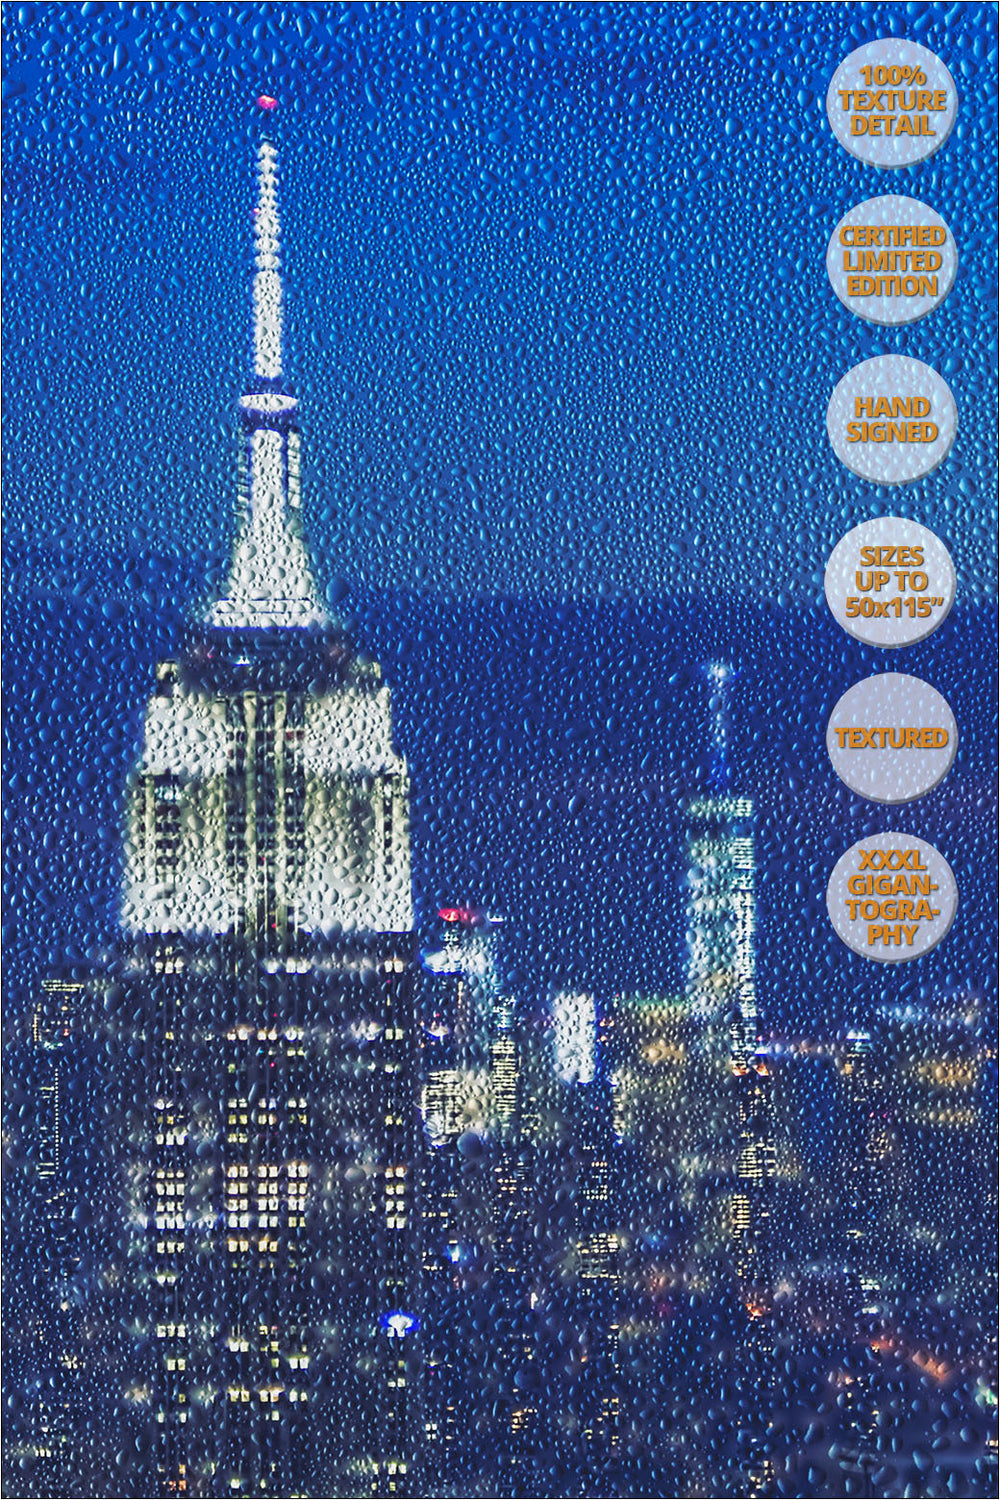 The Empire State at dusk, Manhattan, New York. | 100% Magnification Detail View of the Print.